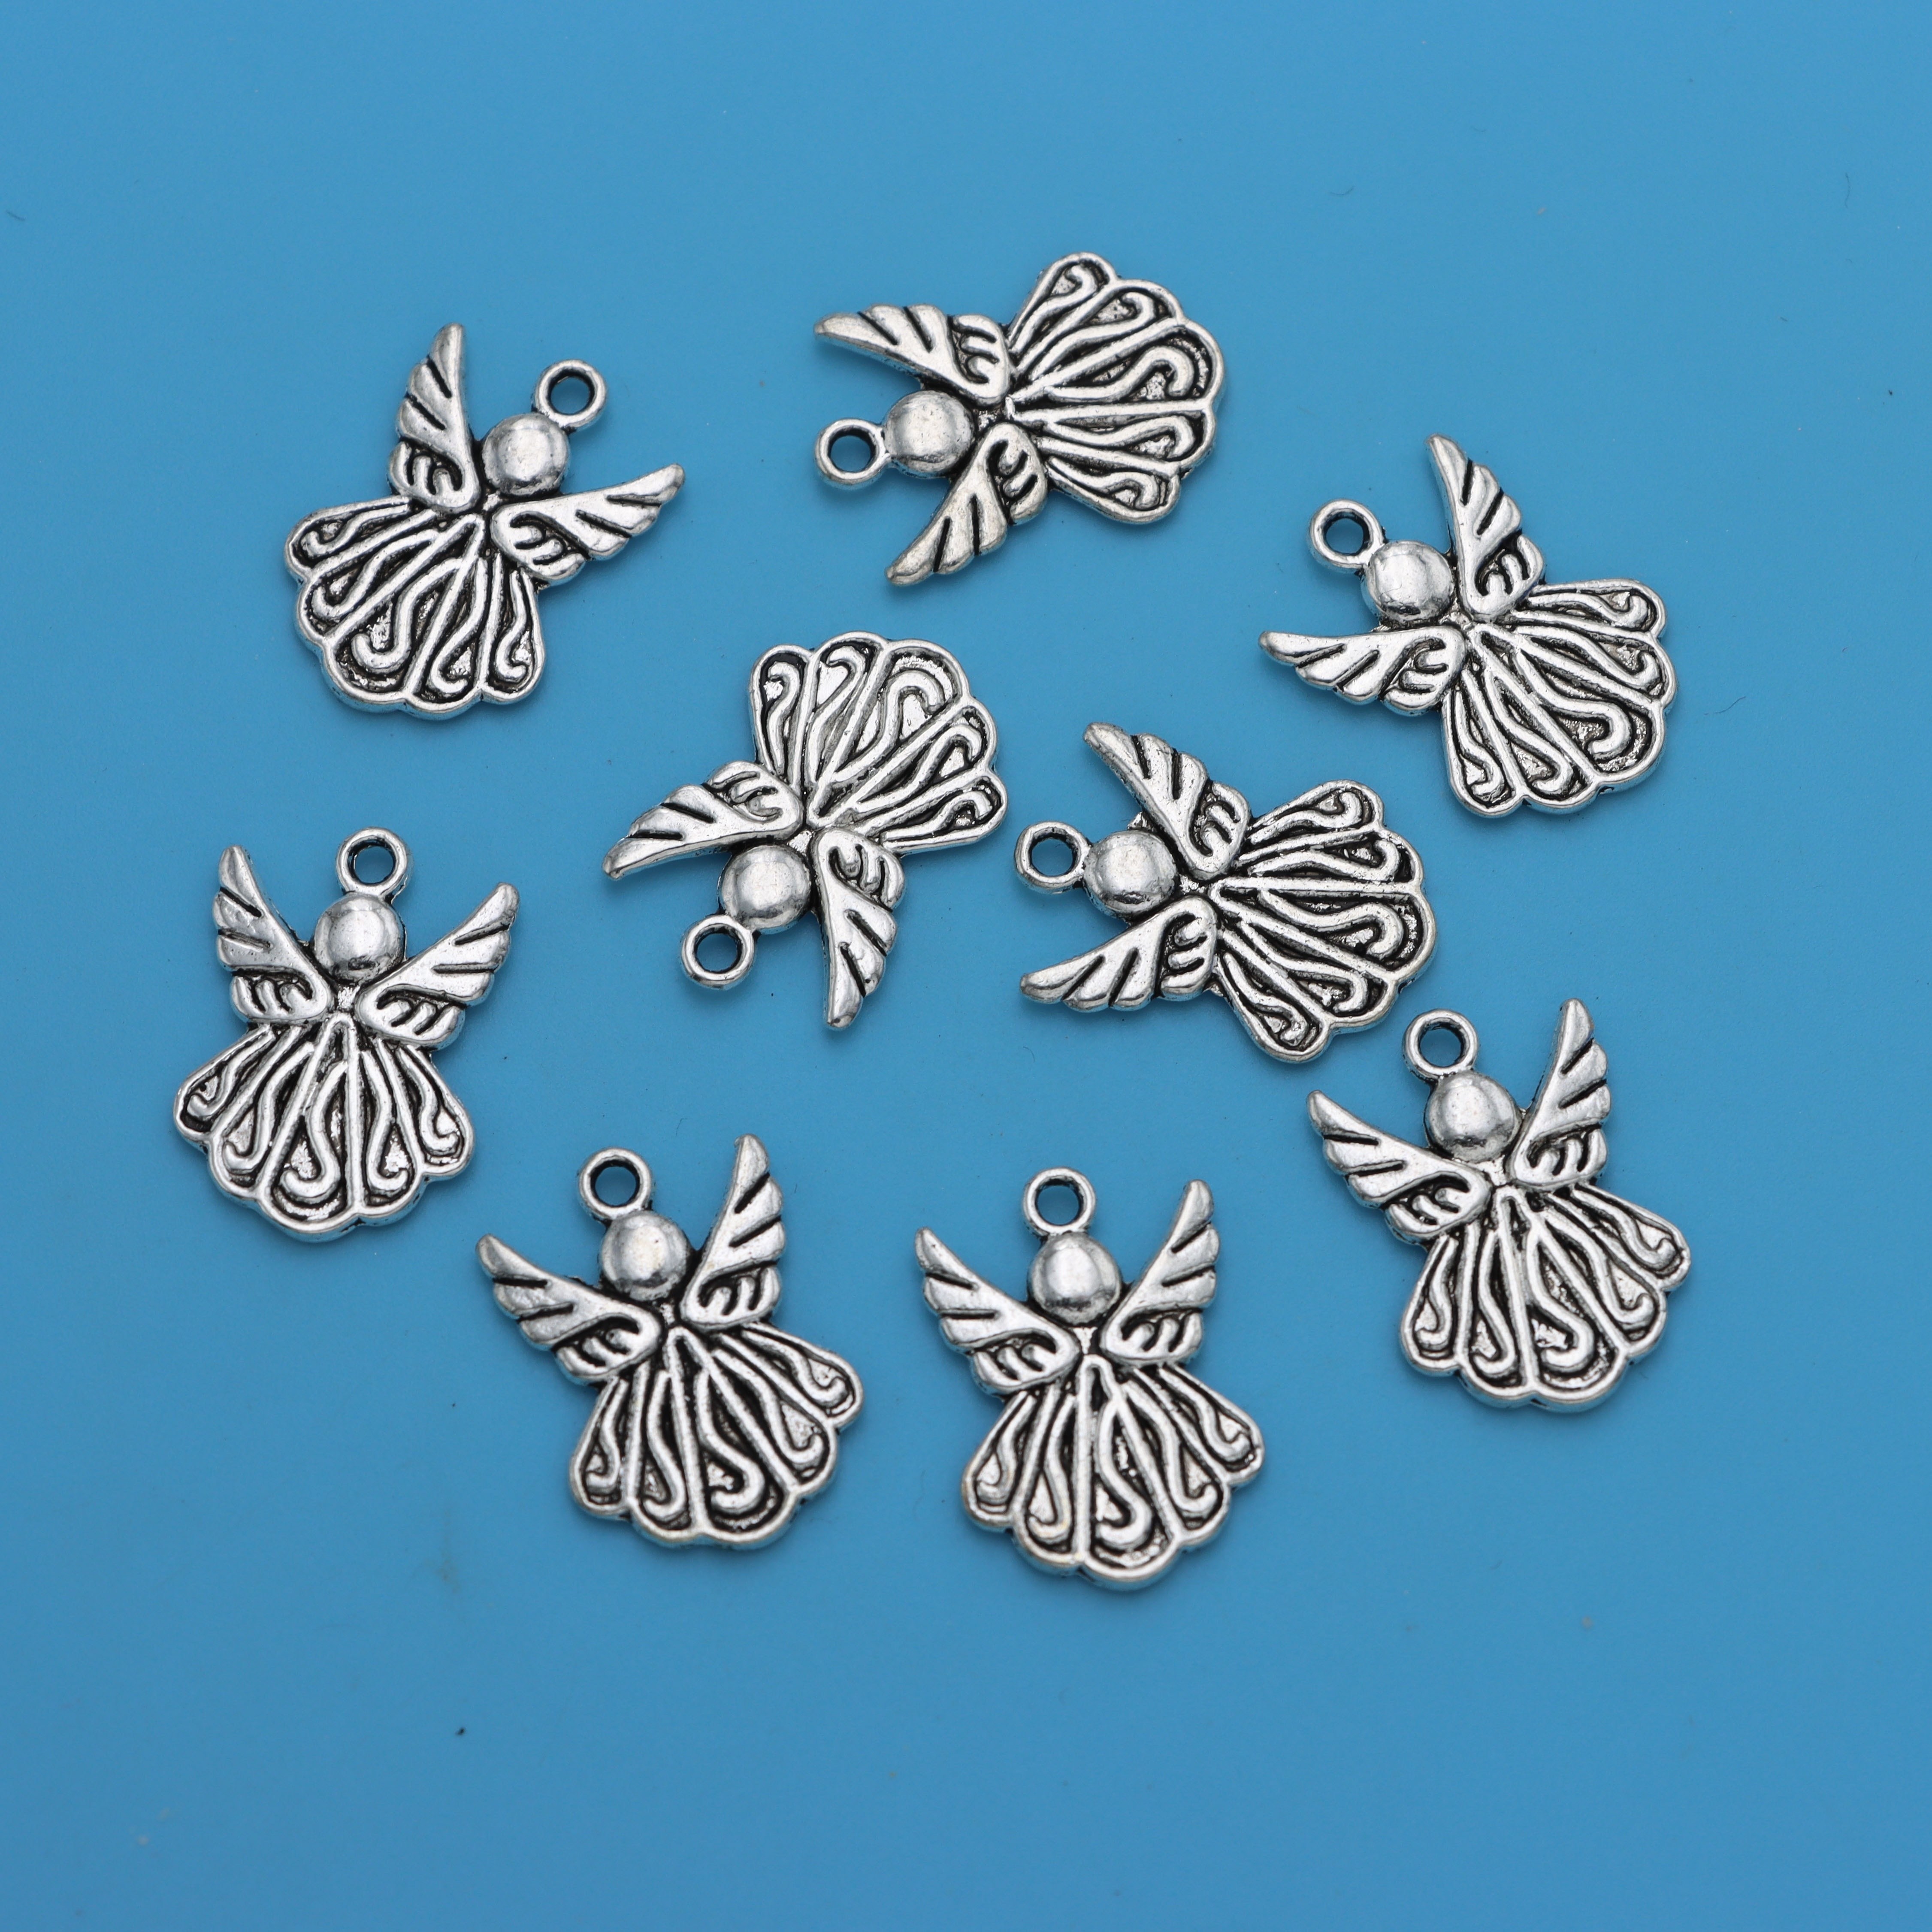 20Pcs Silver Plated Angel Fairy Charms Pendants For Bracelet